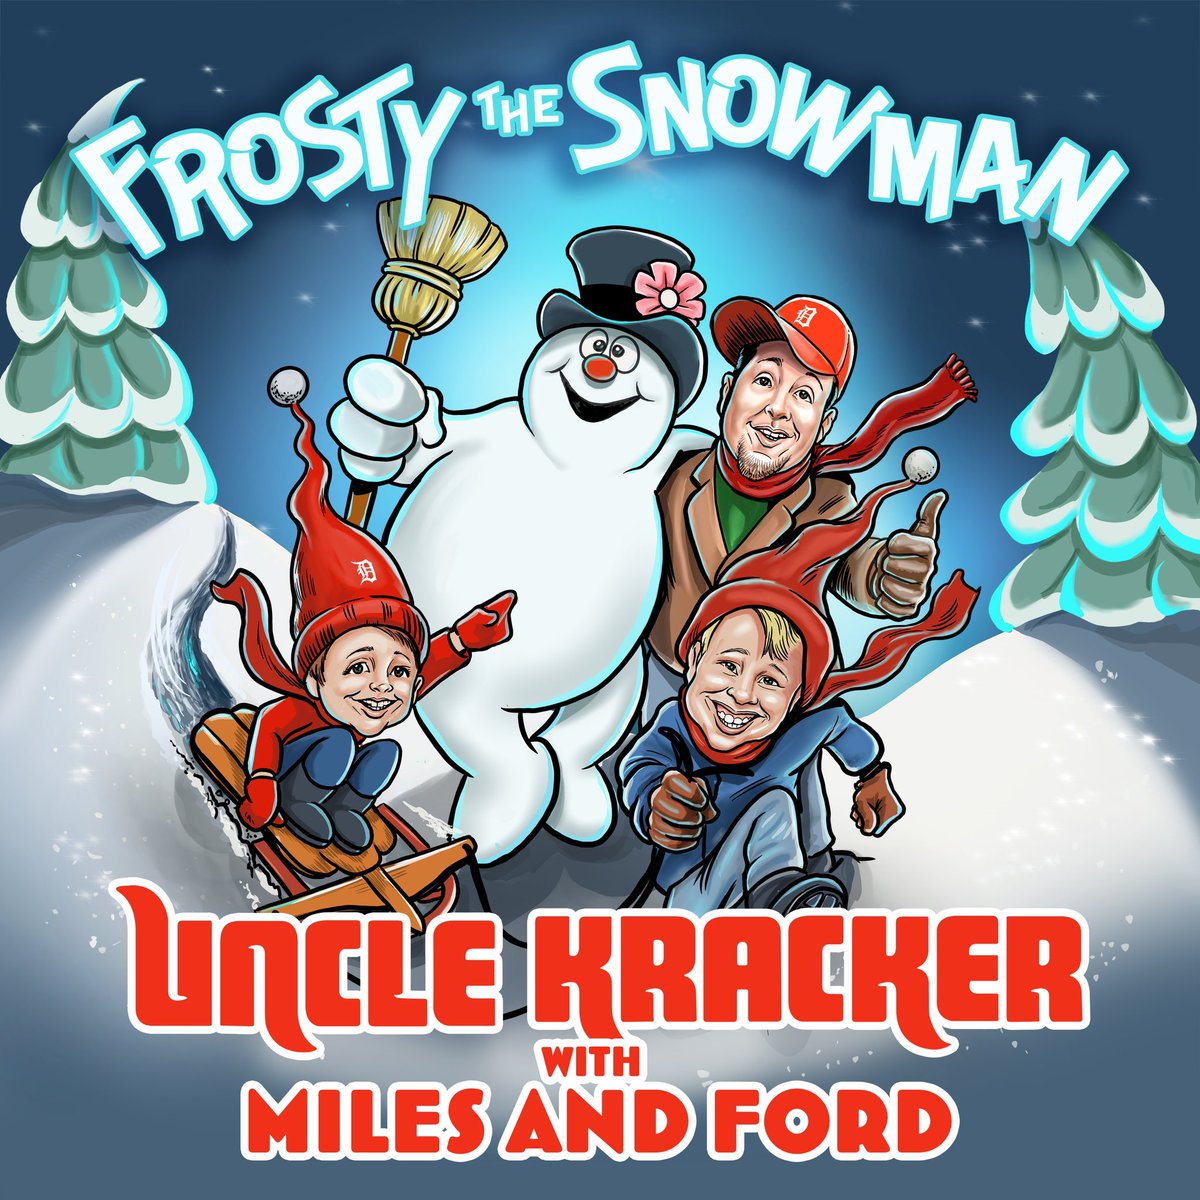 Nothing feels more like Christmas than singing classic Christmas songs like ‘Frosty The Snowman’ and I couldn’t think of a better way to sing them than with my kids. I hope y’all enjoy this one ☃️Stream it now at the link in my bio